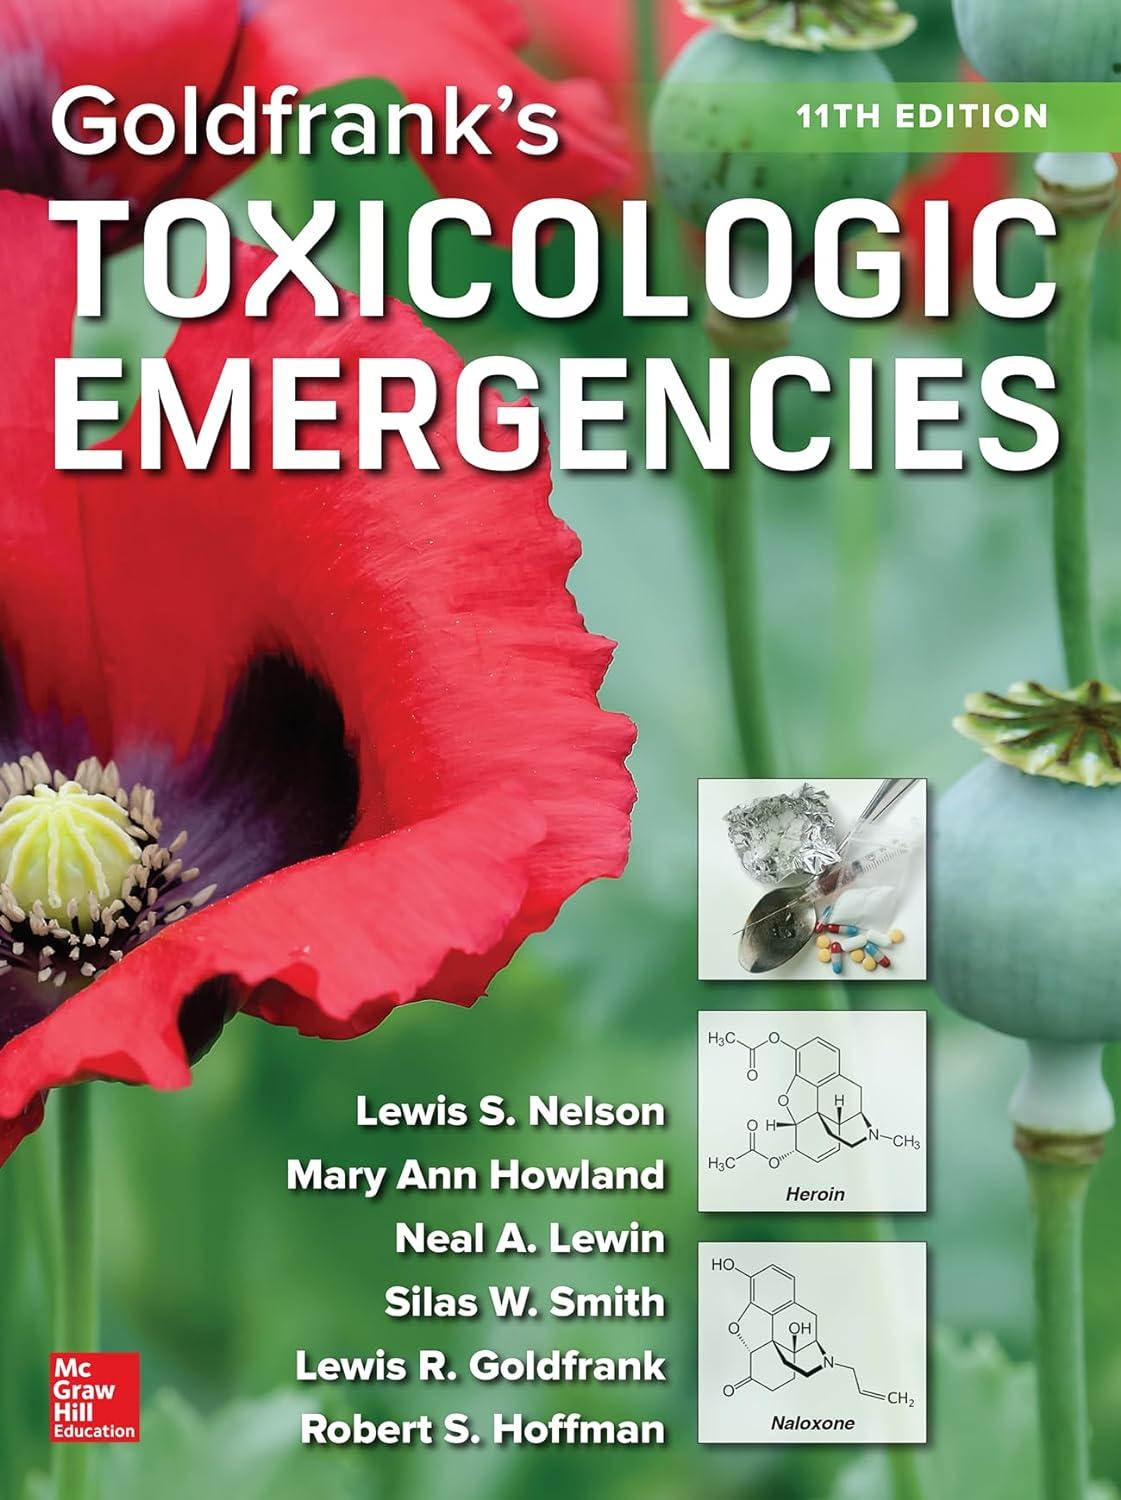 goldfranks toxicologic emergencies 11th edition lewis s. nelson, mary ann howland, neal a. lewin, silas w.